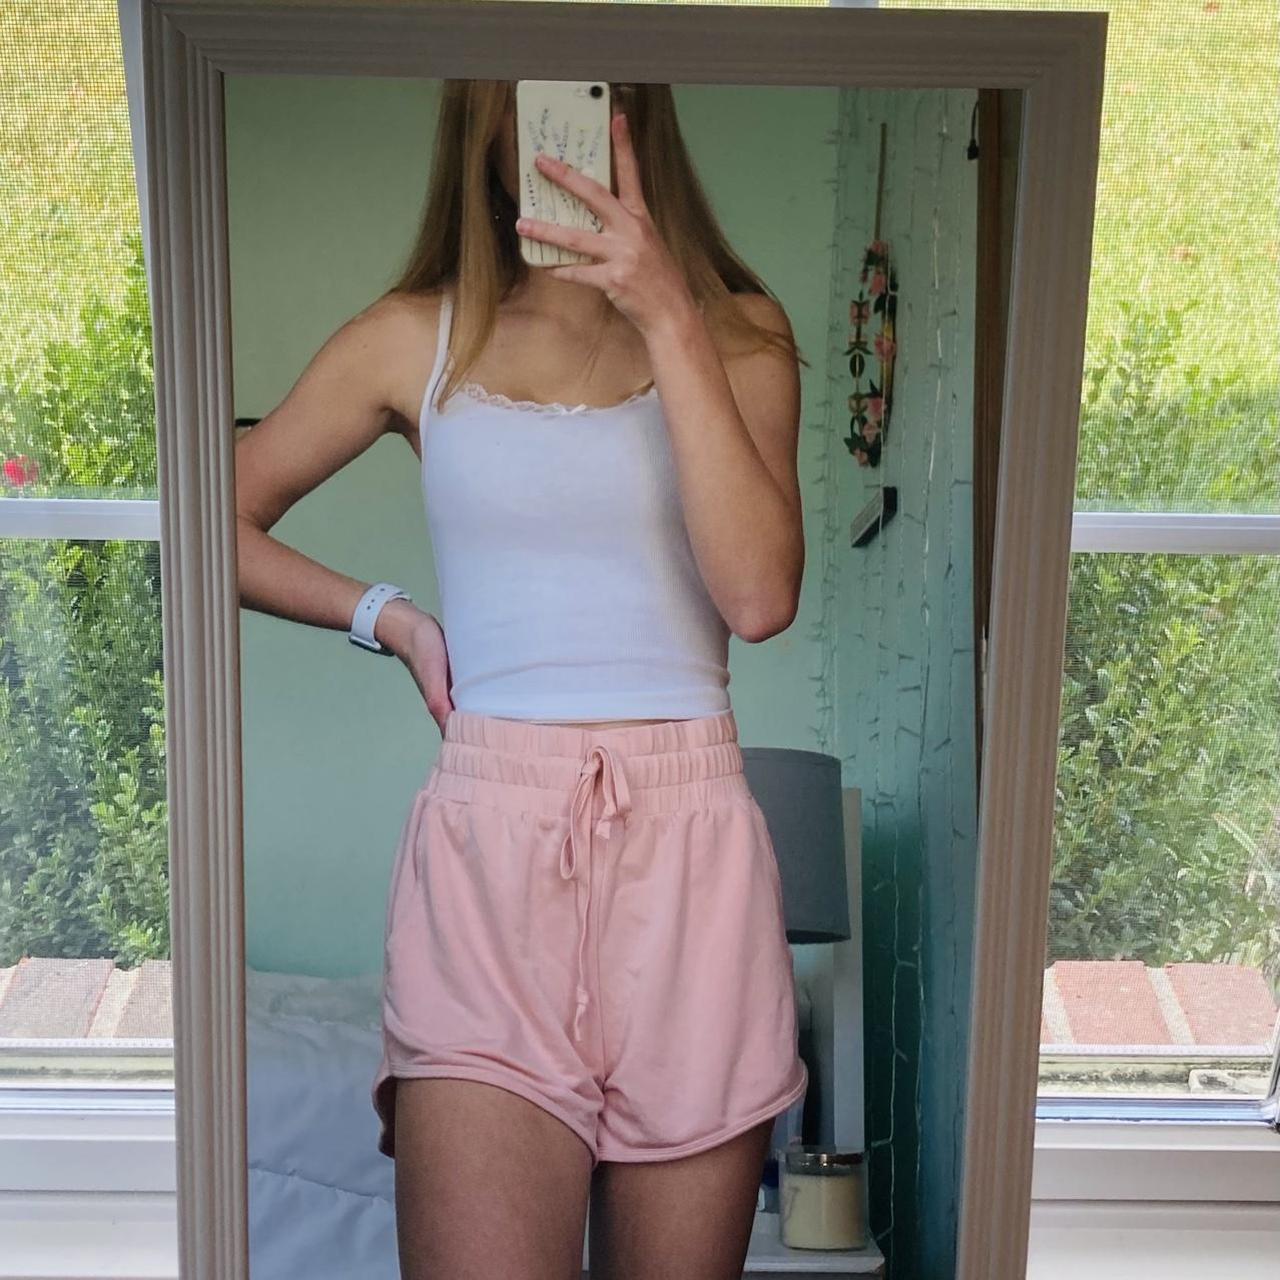 Product Image 1 - Pink fabletics soft shorts
These are